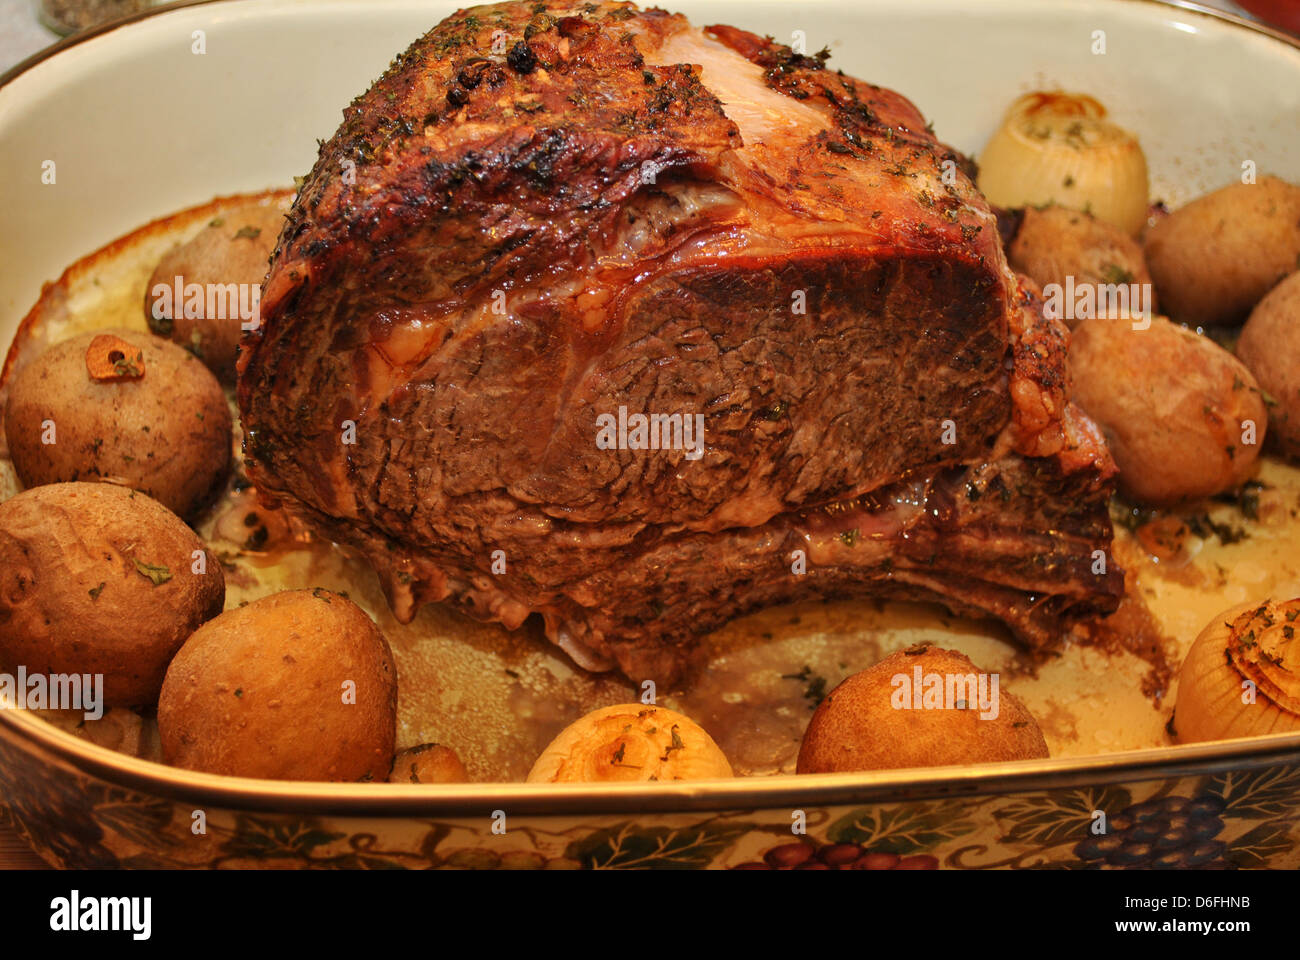 https://c8.alamy.com/comp/D6FHNB/prime-rib-roast-in-a-pan-with-potatoes-and-onions-D6FHNB.jpg